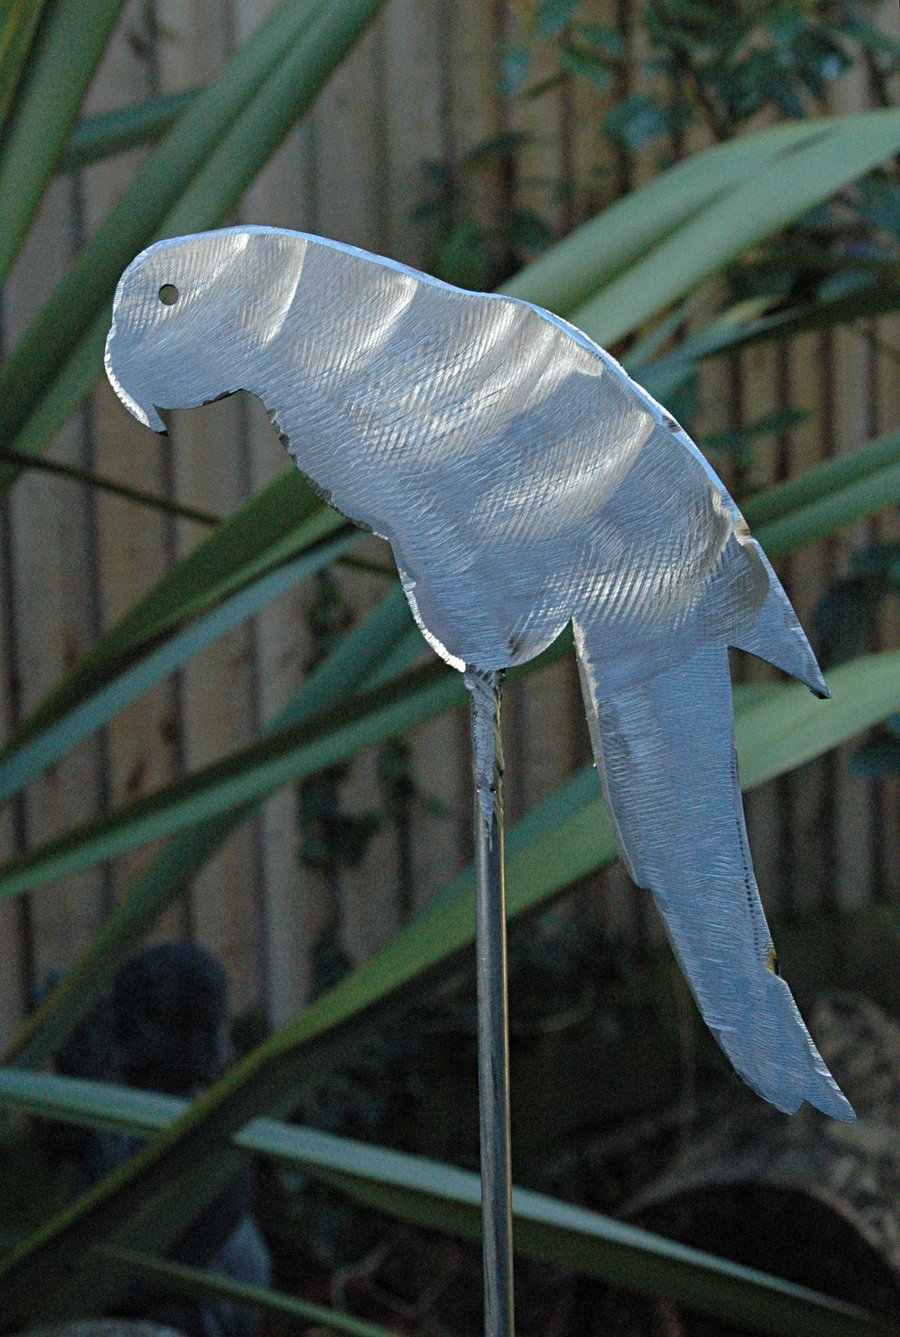 Self supporting 'in-pot' sculptured metal parrot plant support